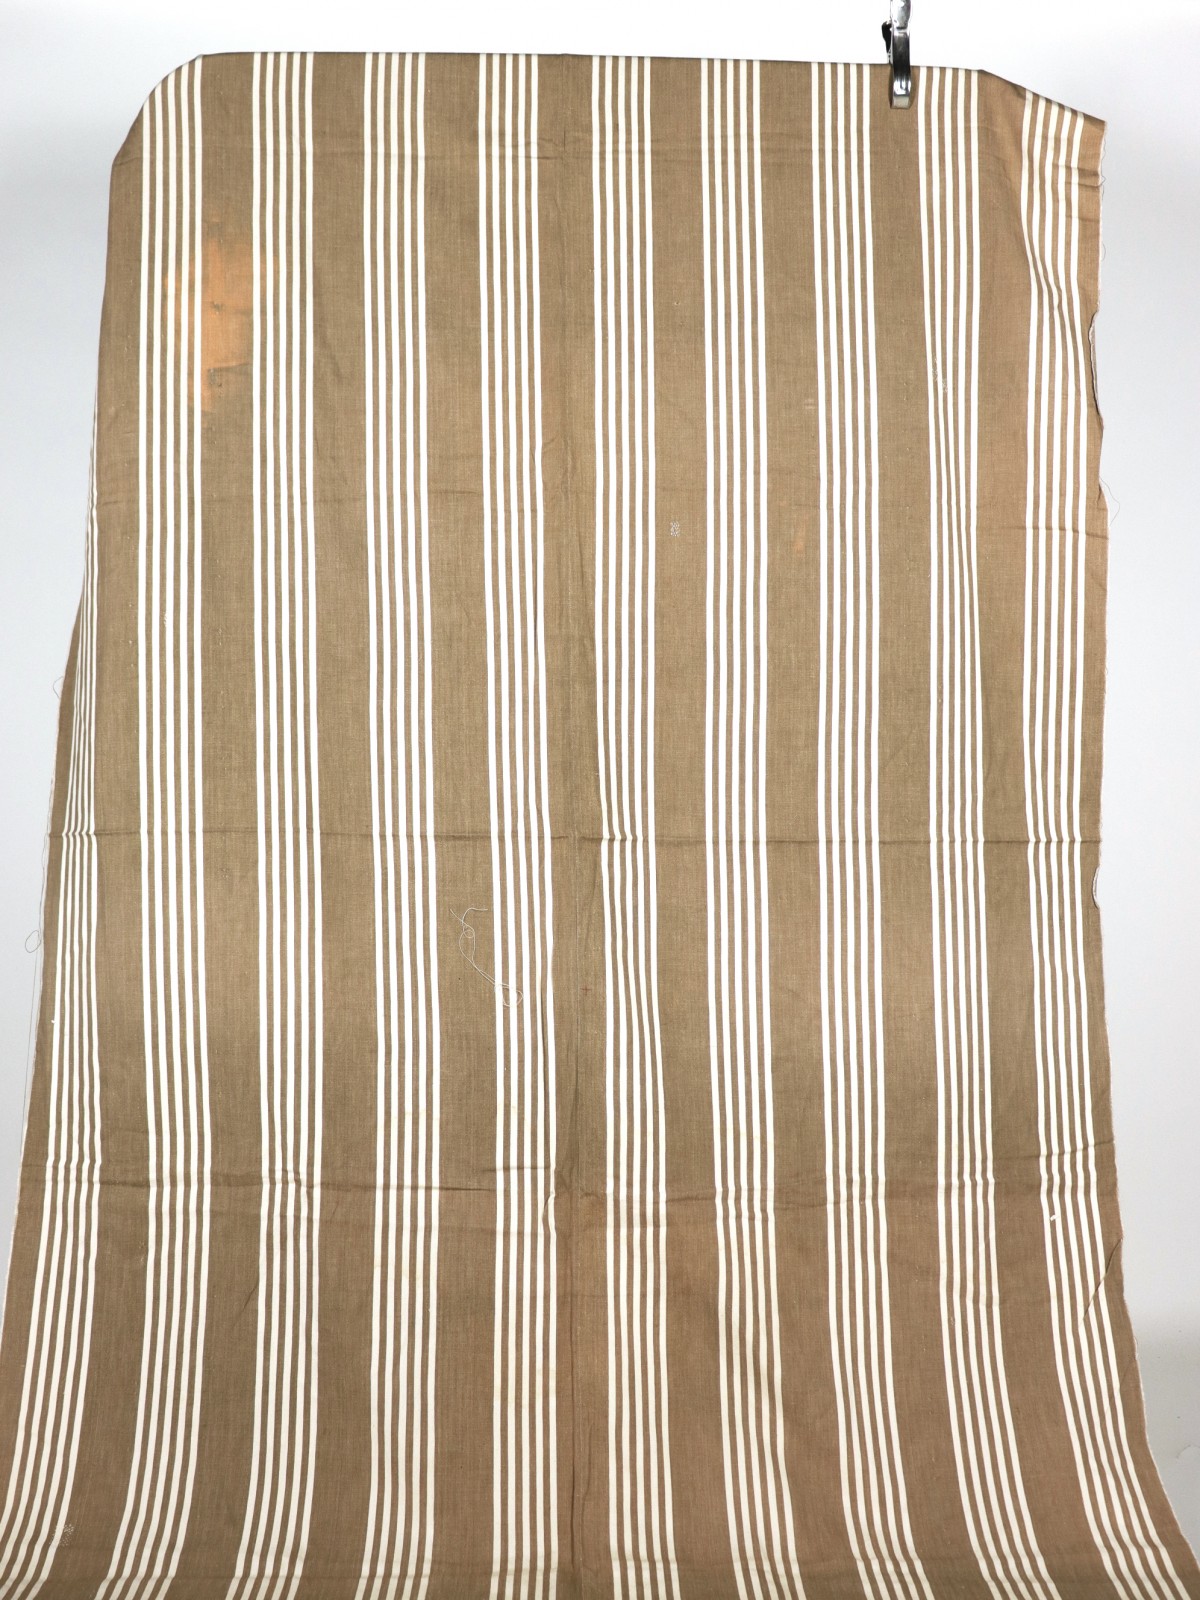 french ticking cotton fabric, beige stripe, early1900's